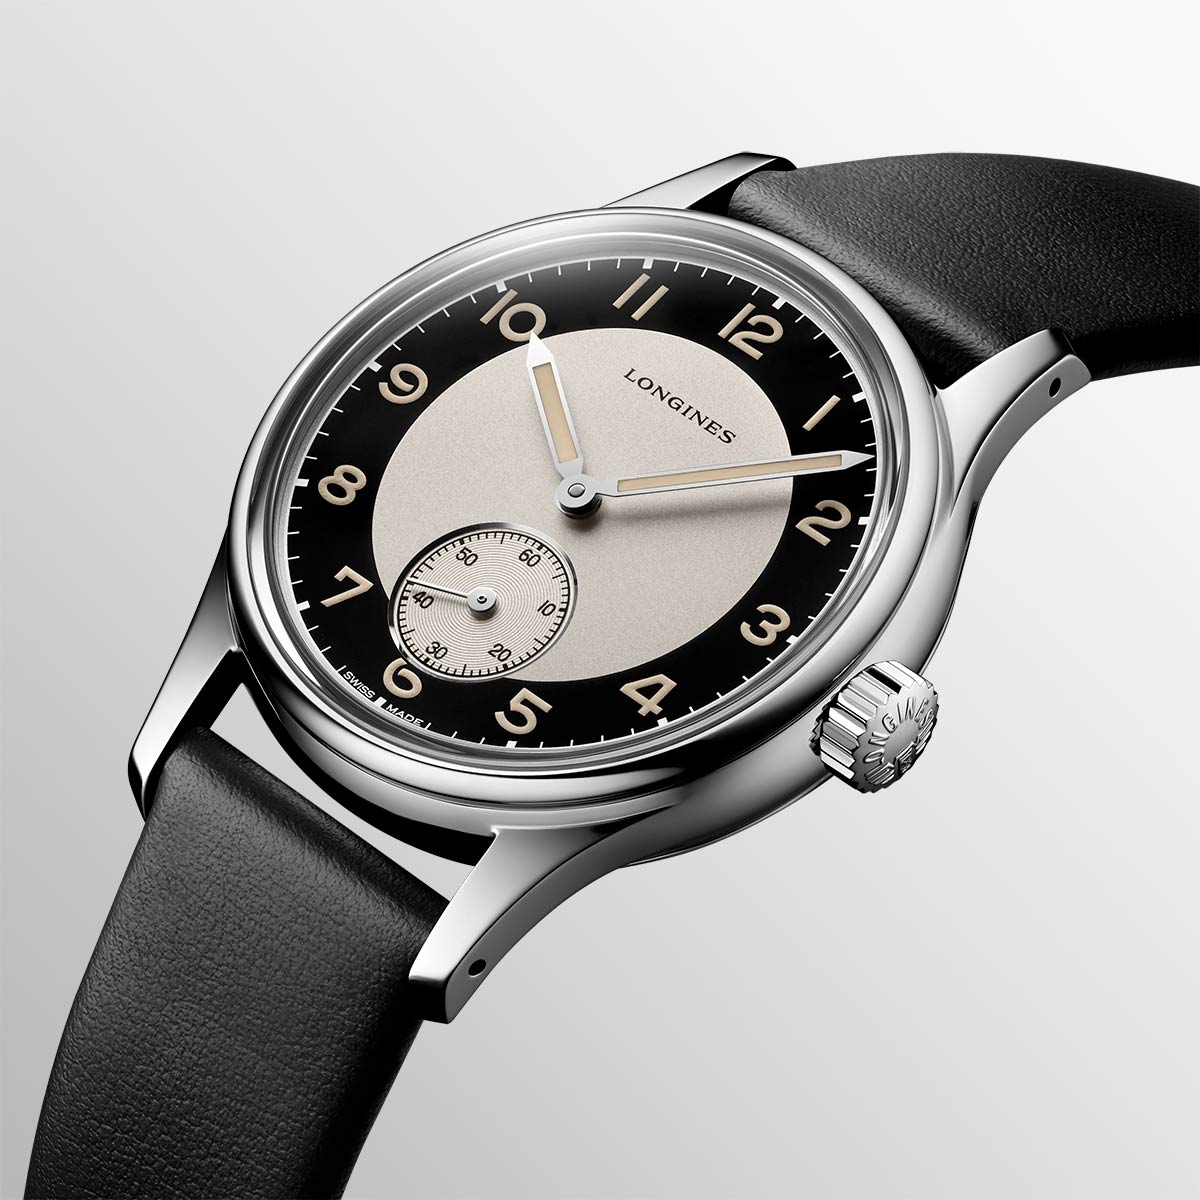 Longines - Heritage Classic Tuxedo | Time and Watches | The watch blog